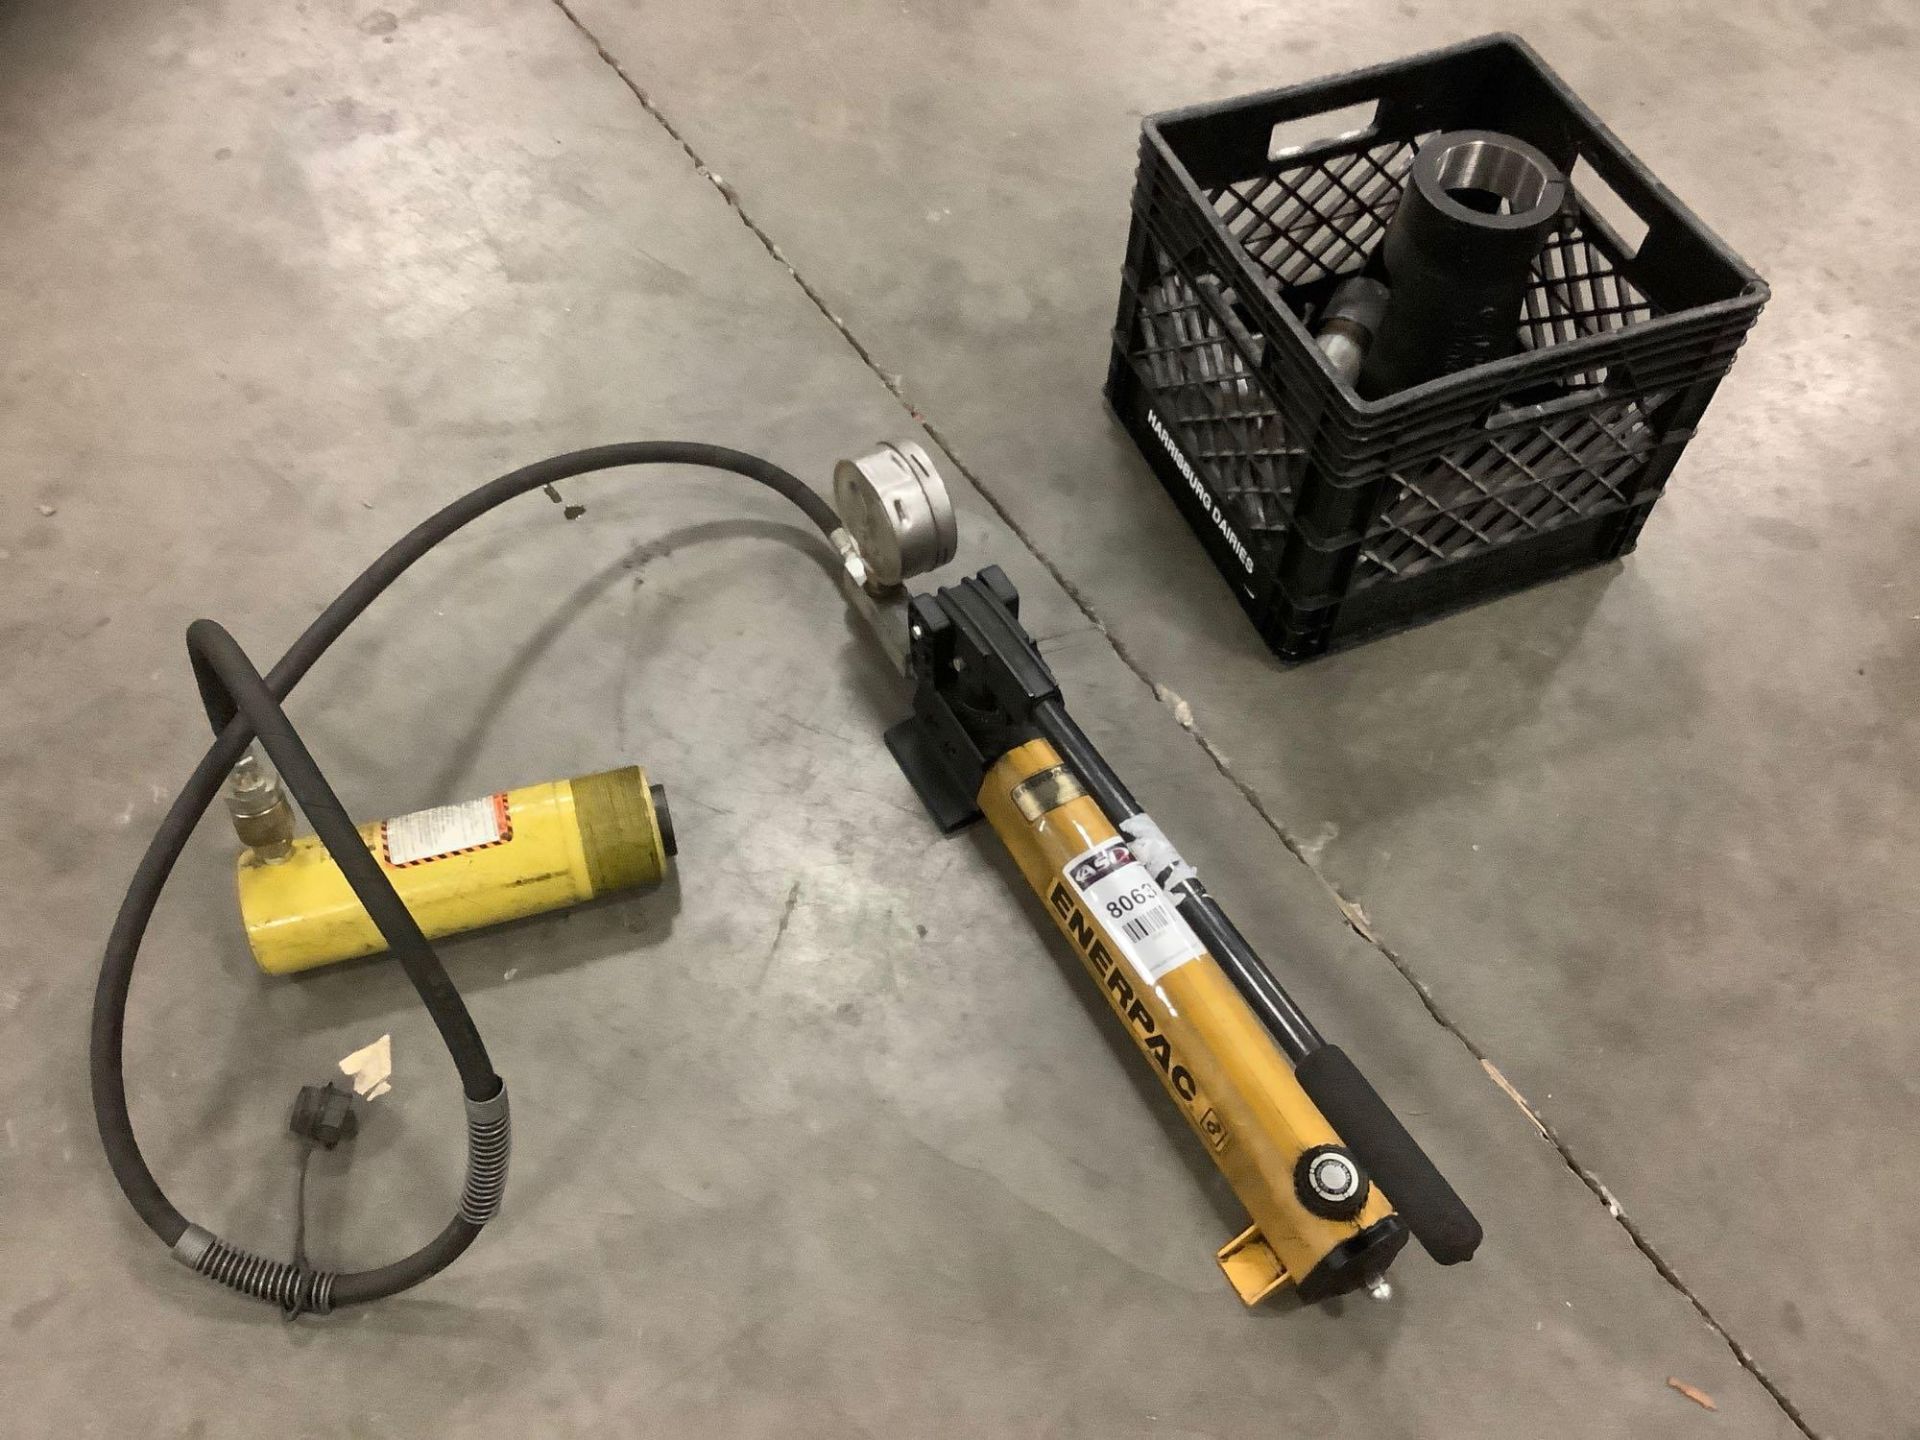 ENERPAC PUMP MODEL P-392 WITH ENERPAC HYDRAULIC CYLINDER MODEL RC256 - Image 3 of 7